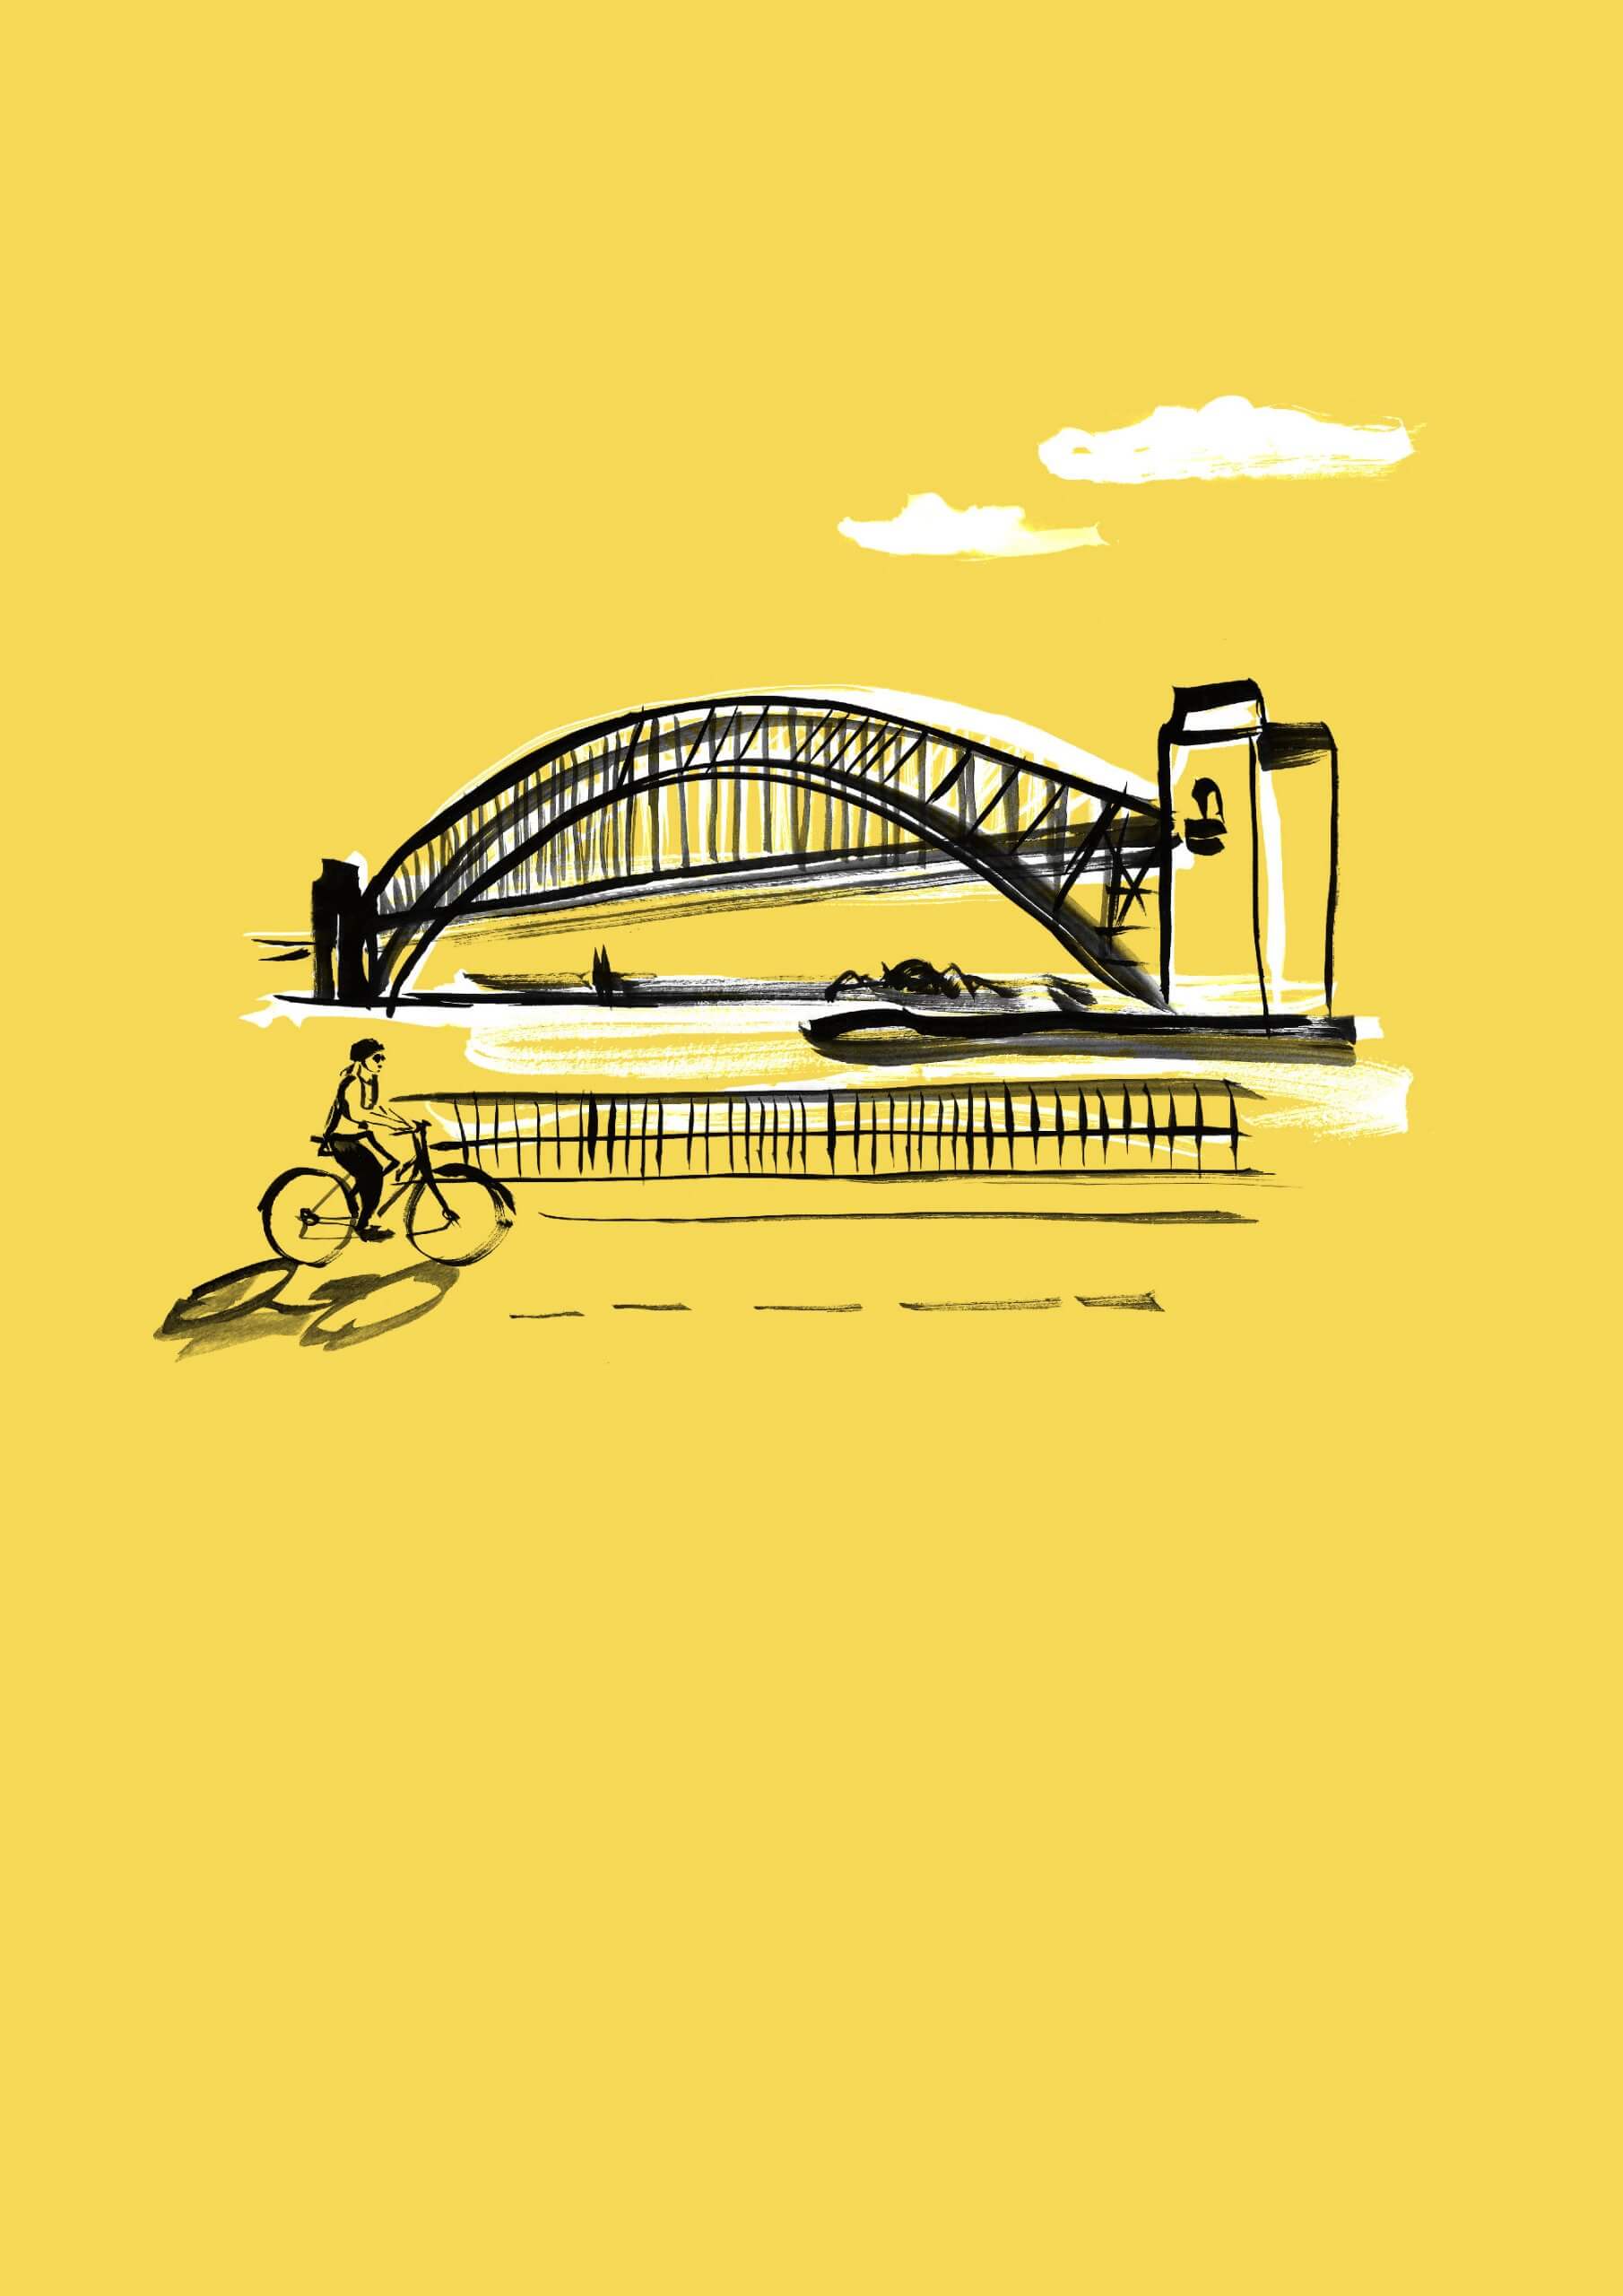 Ink illustration of the skyline of Sydney and the Sydney harbour bridge with a cyclist passing the iconic landmark. Limited colour palette using ink and brush to create expressive inky travel illustration.